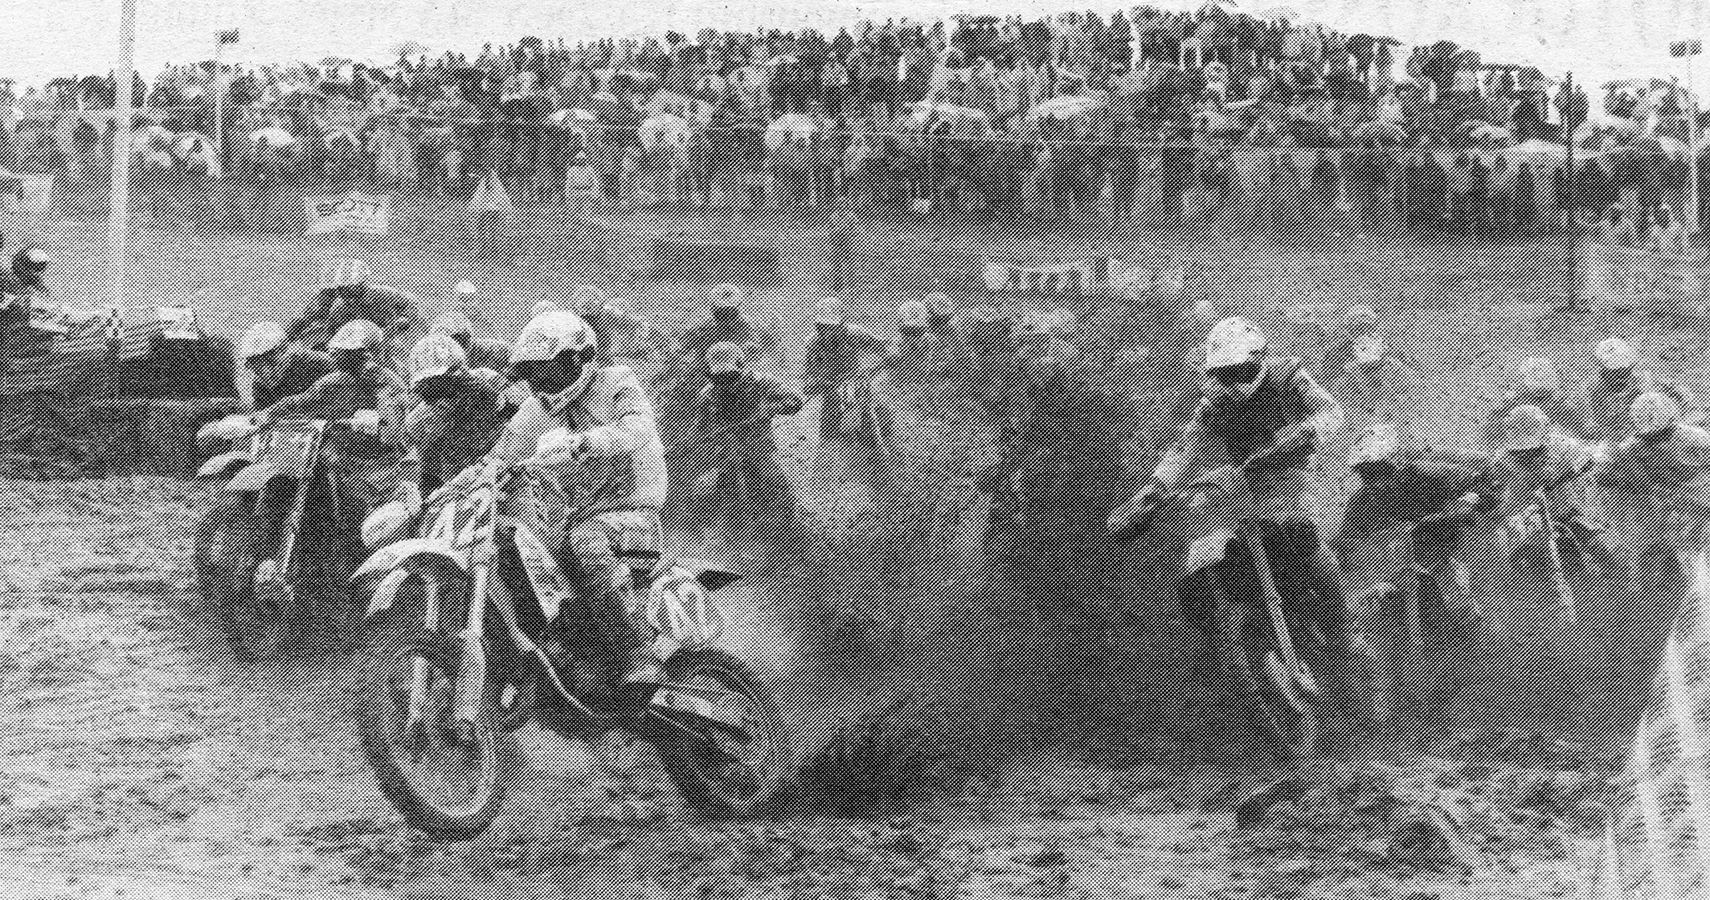 The Official AMA Motocross Began In 1972 And Ran In Two Classes, The 250cc, And The 500cc